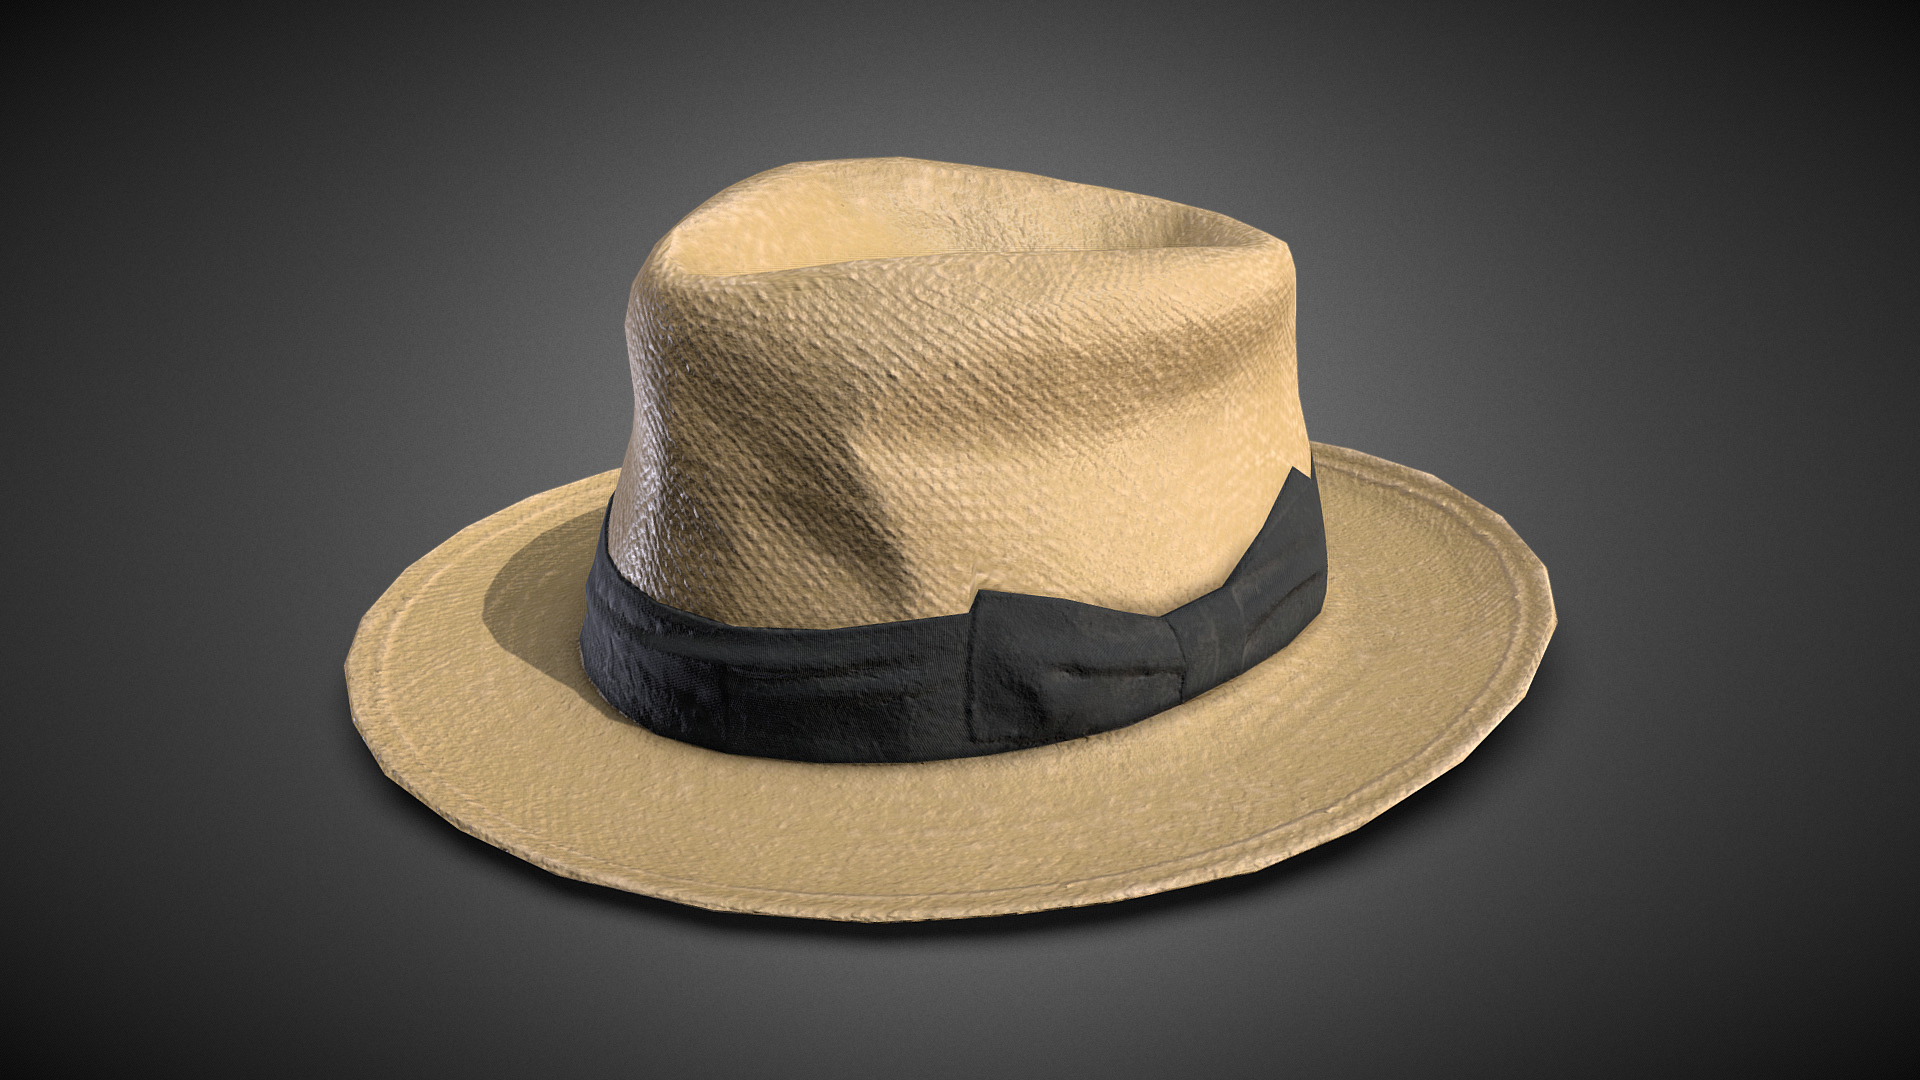 3D model Panama hat – game ready #AgisoftClothesChallenge - This is a 3D model of the Panama hat - game ready #AgisoftClothesChallenge. The 3D model is about a hat on a black background.